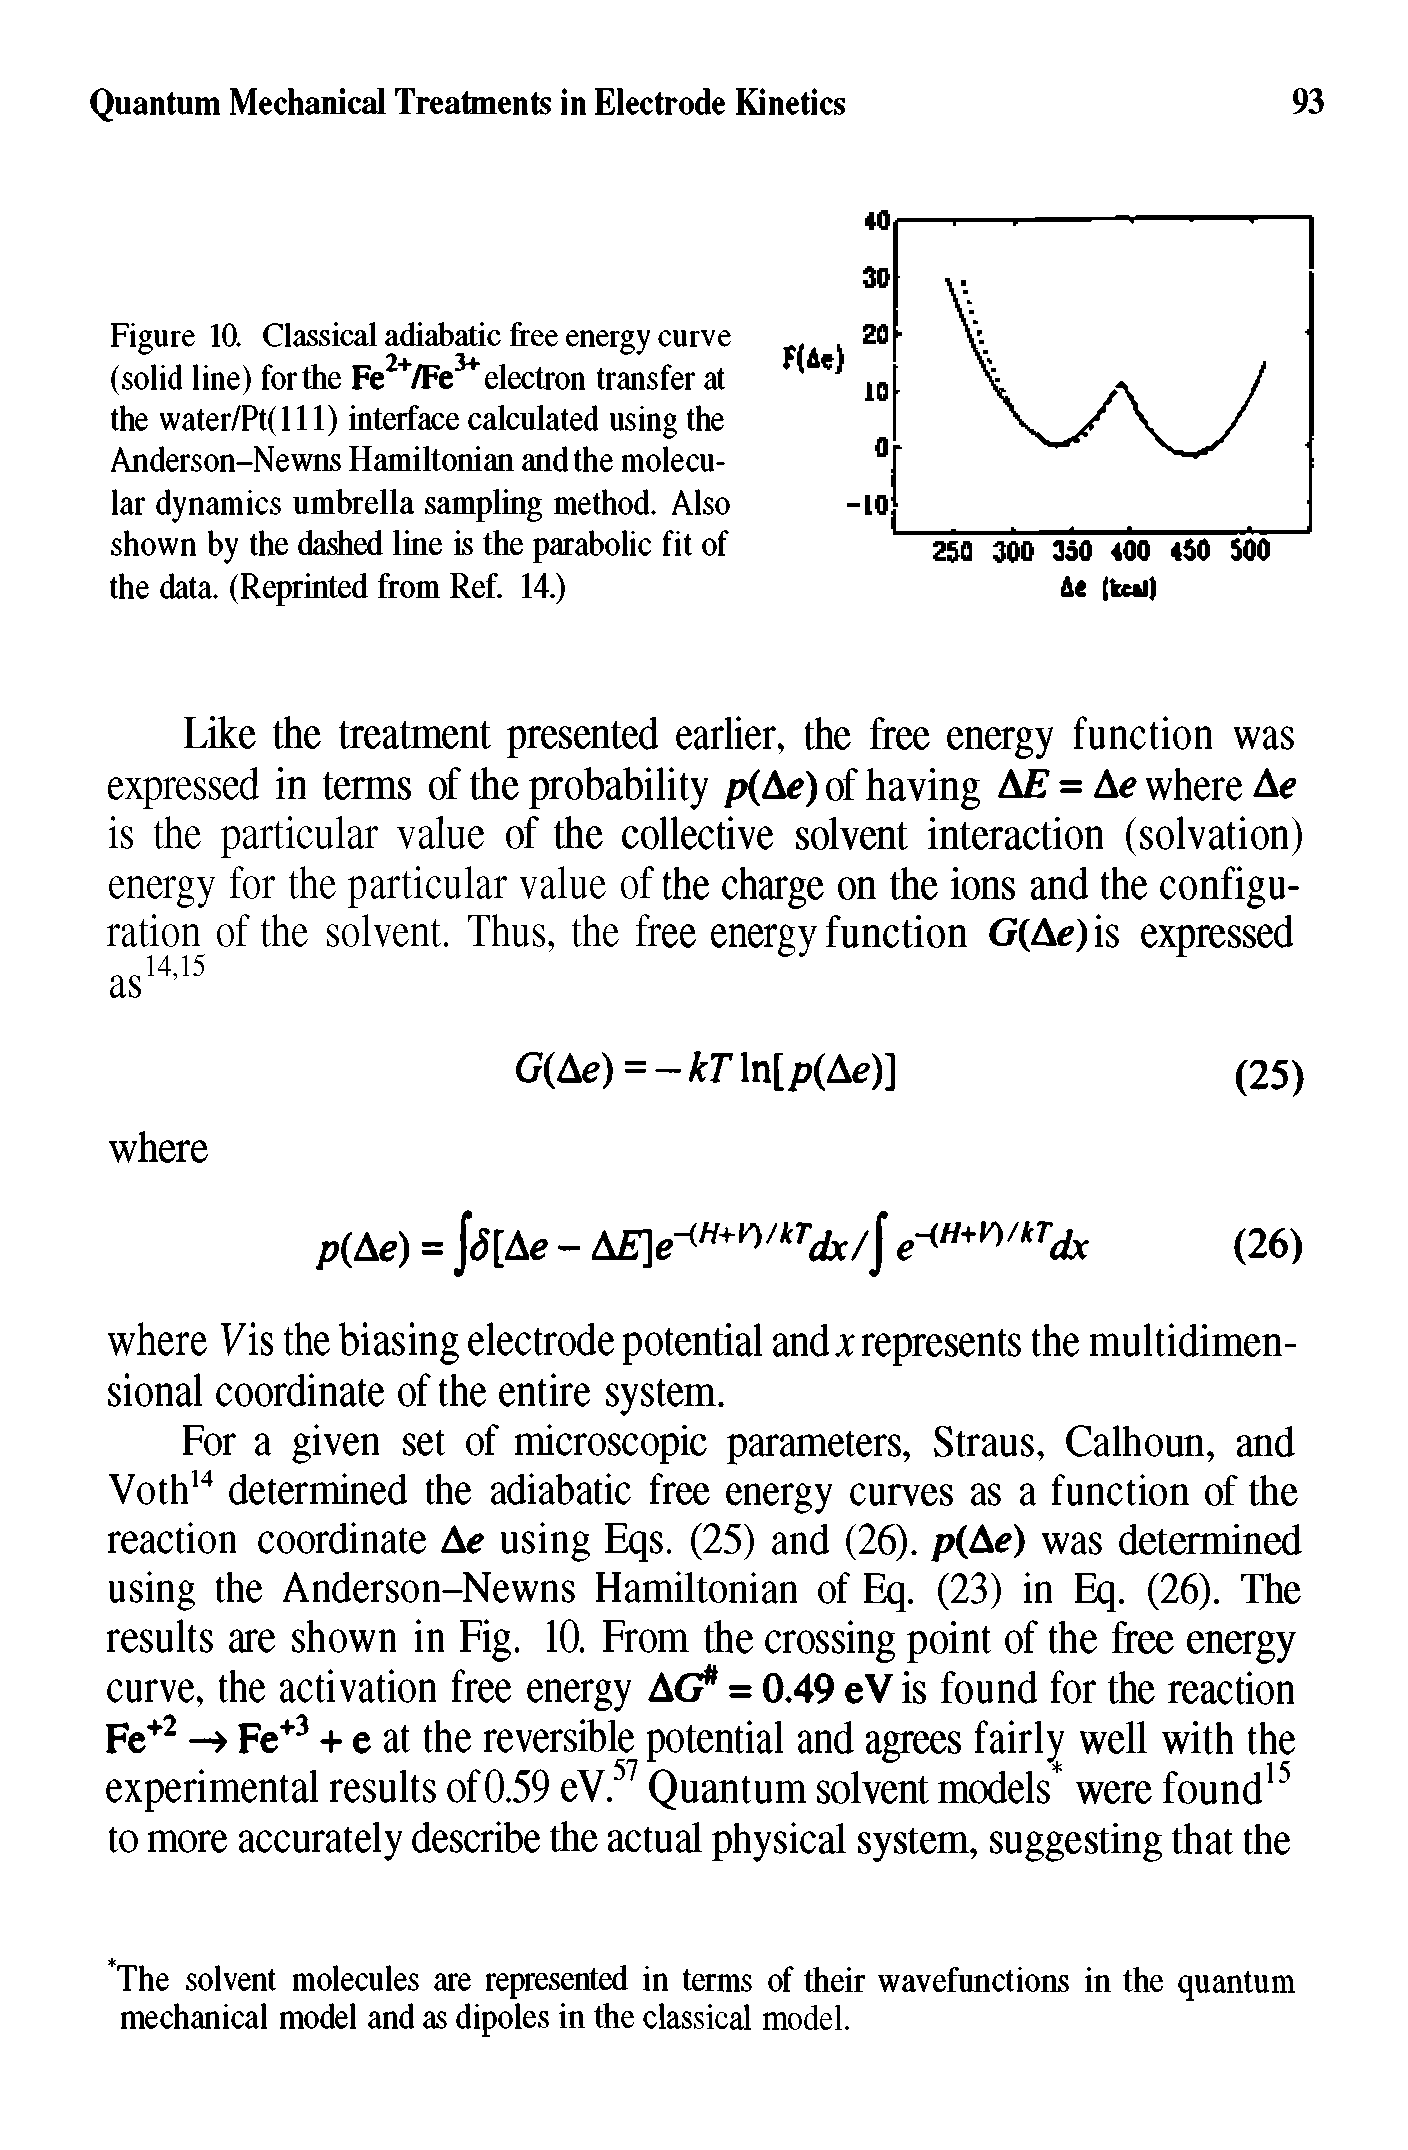 Figure 10. Classical adiabatic free energy curve (solid line) forthe Fe /Fe electron transfer at the water/Pt(lll) interface calculated using the Anderson-Newns Hamiltonian and the molecular dynamics umbrella sampling method. Also shown by the dashed line is the parabolic fit of the data. (Reprinted from Ref. 14.)...